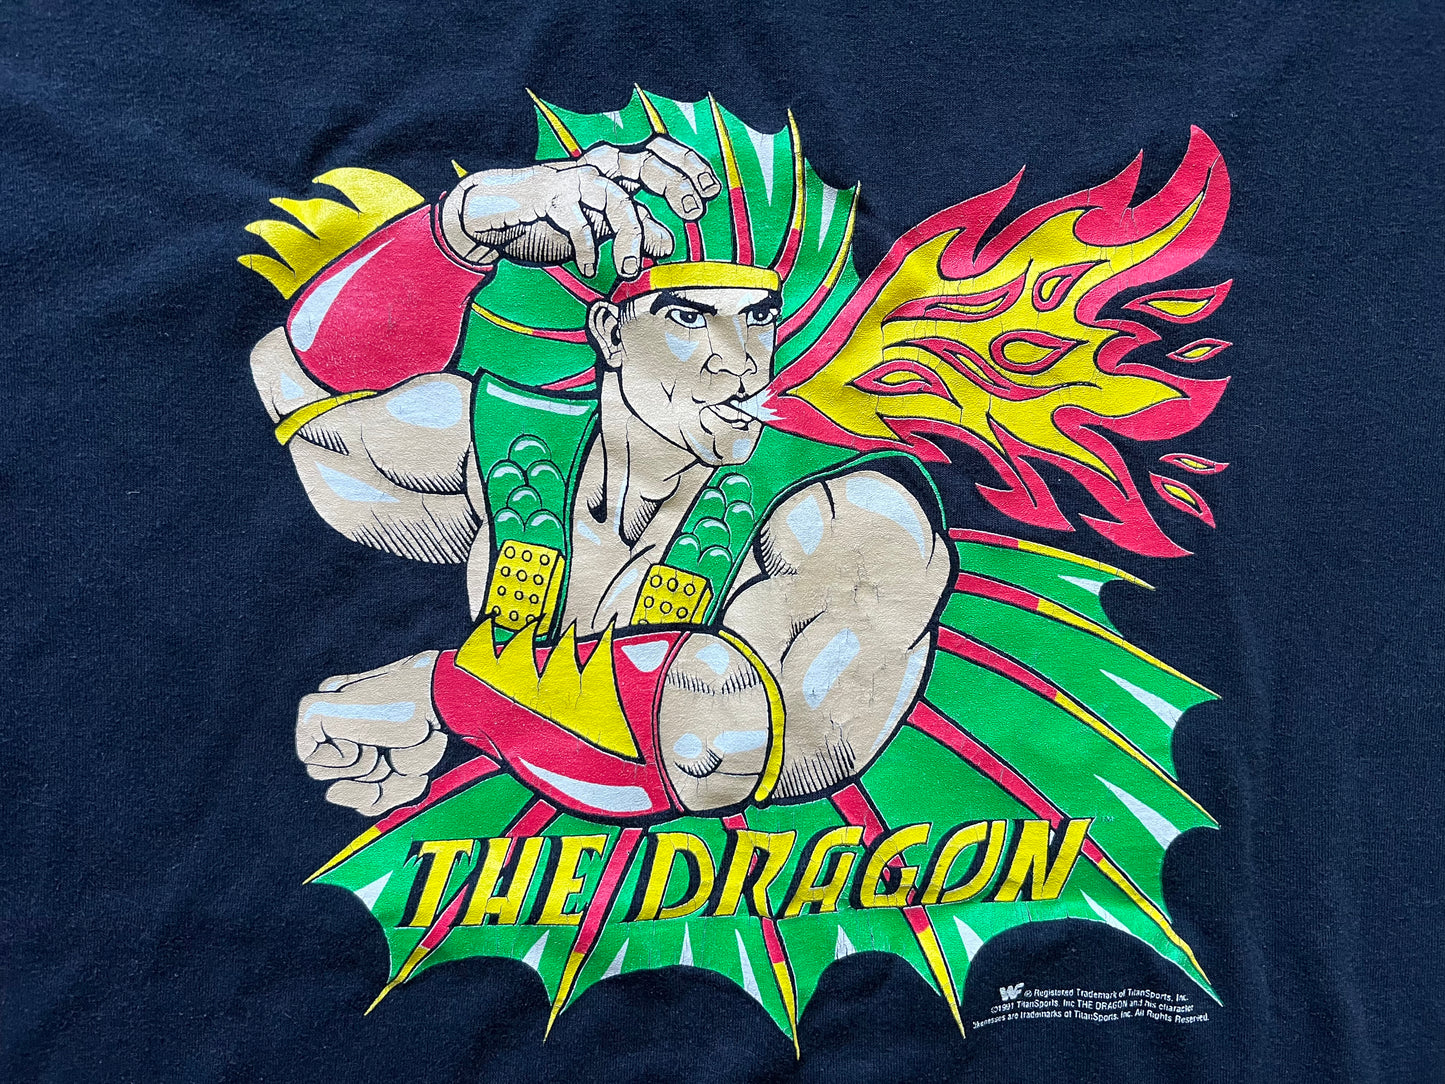 1991 WWF Ricky “The Dragon” Steamboat shirt